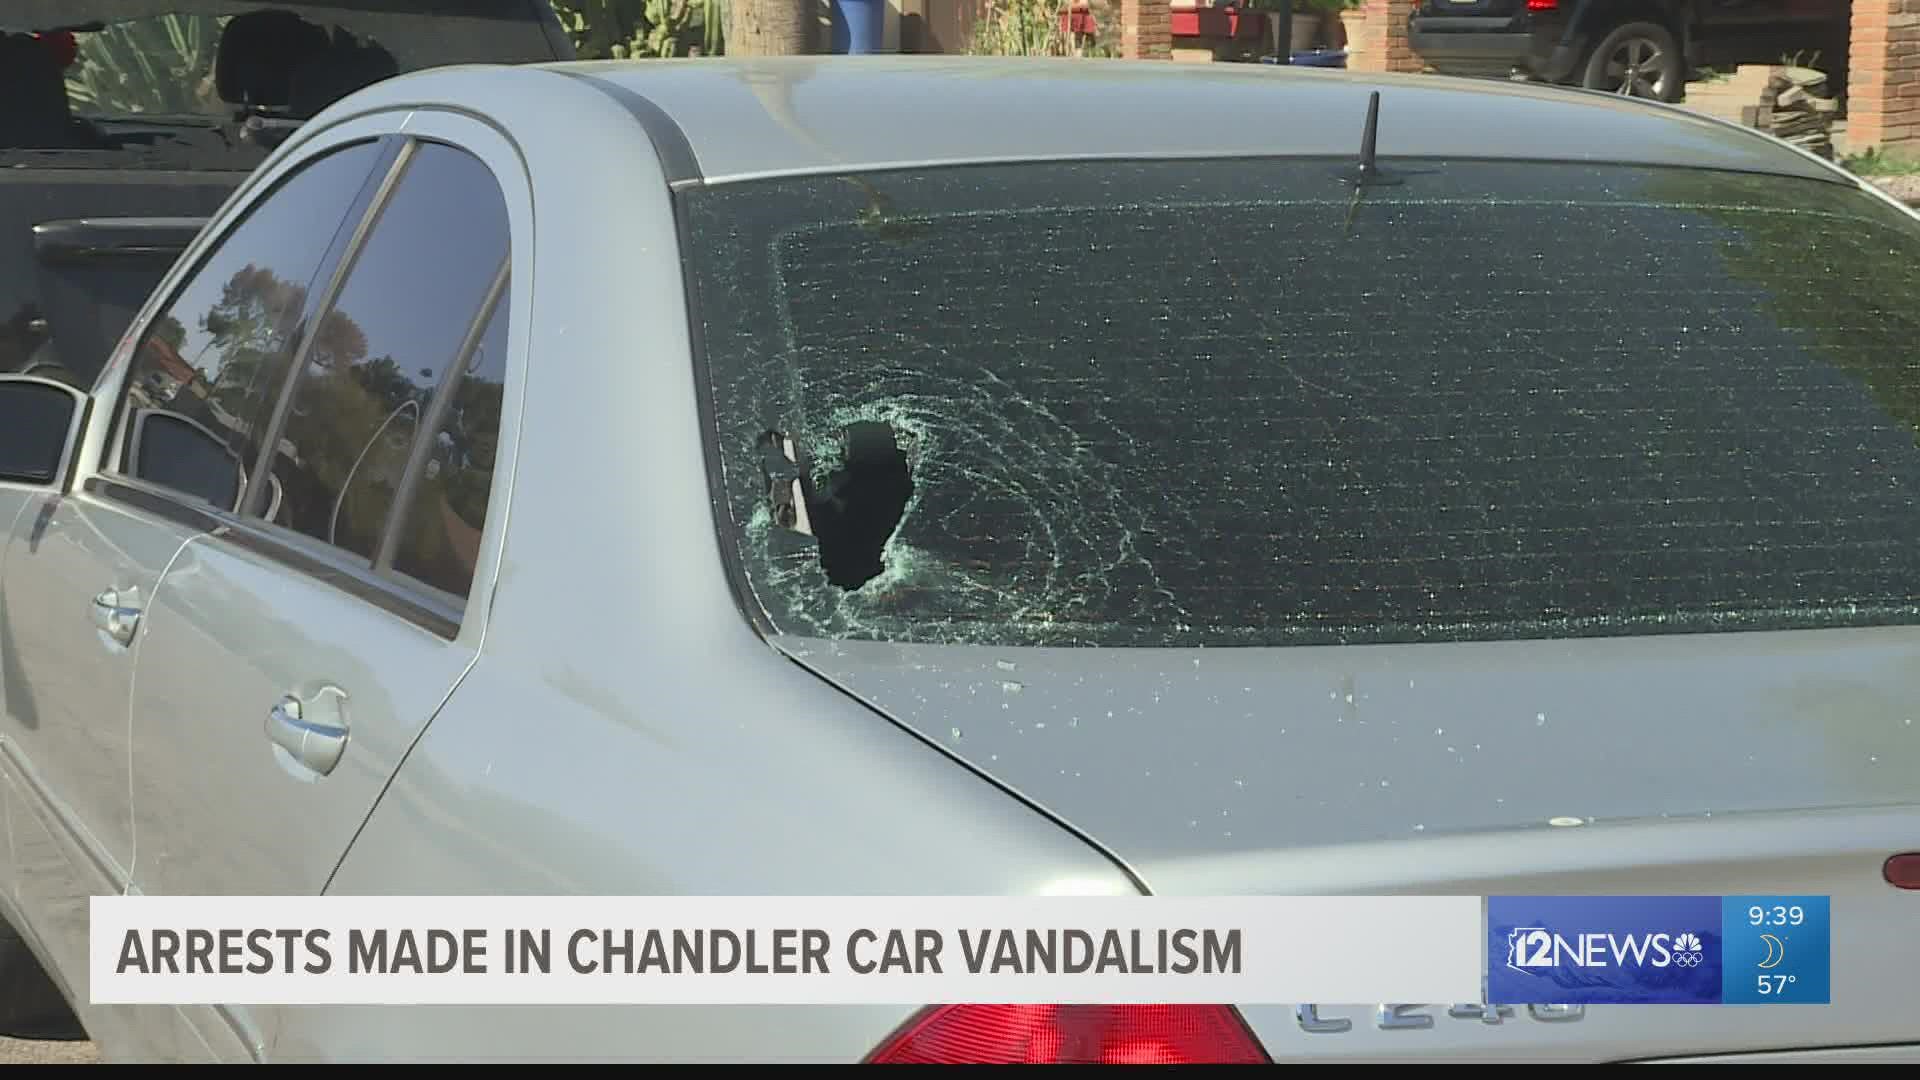 Authorities detained three juveniles and a 19-year-old accused of vandalizing several cars in Chandler.